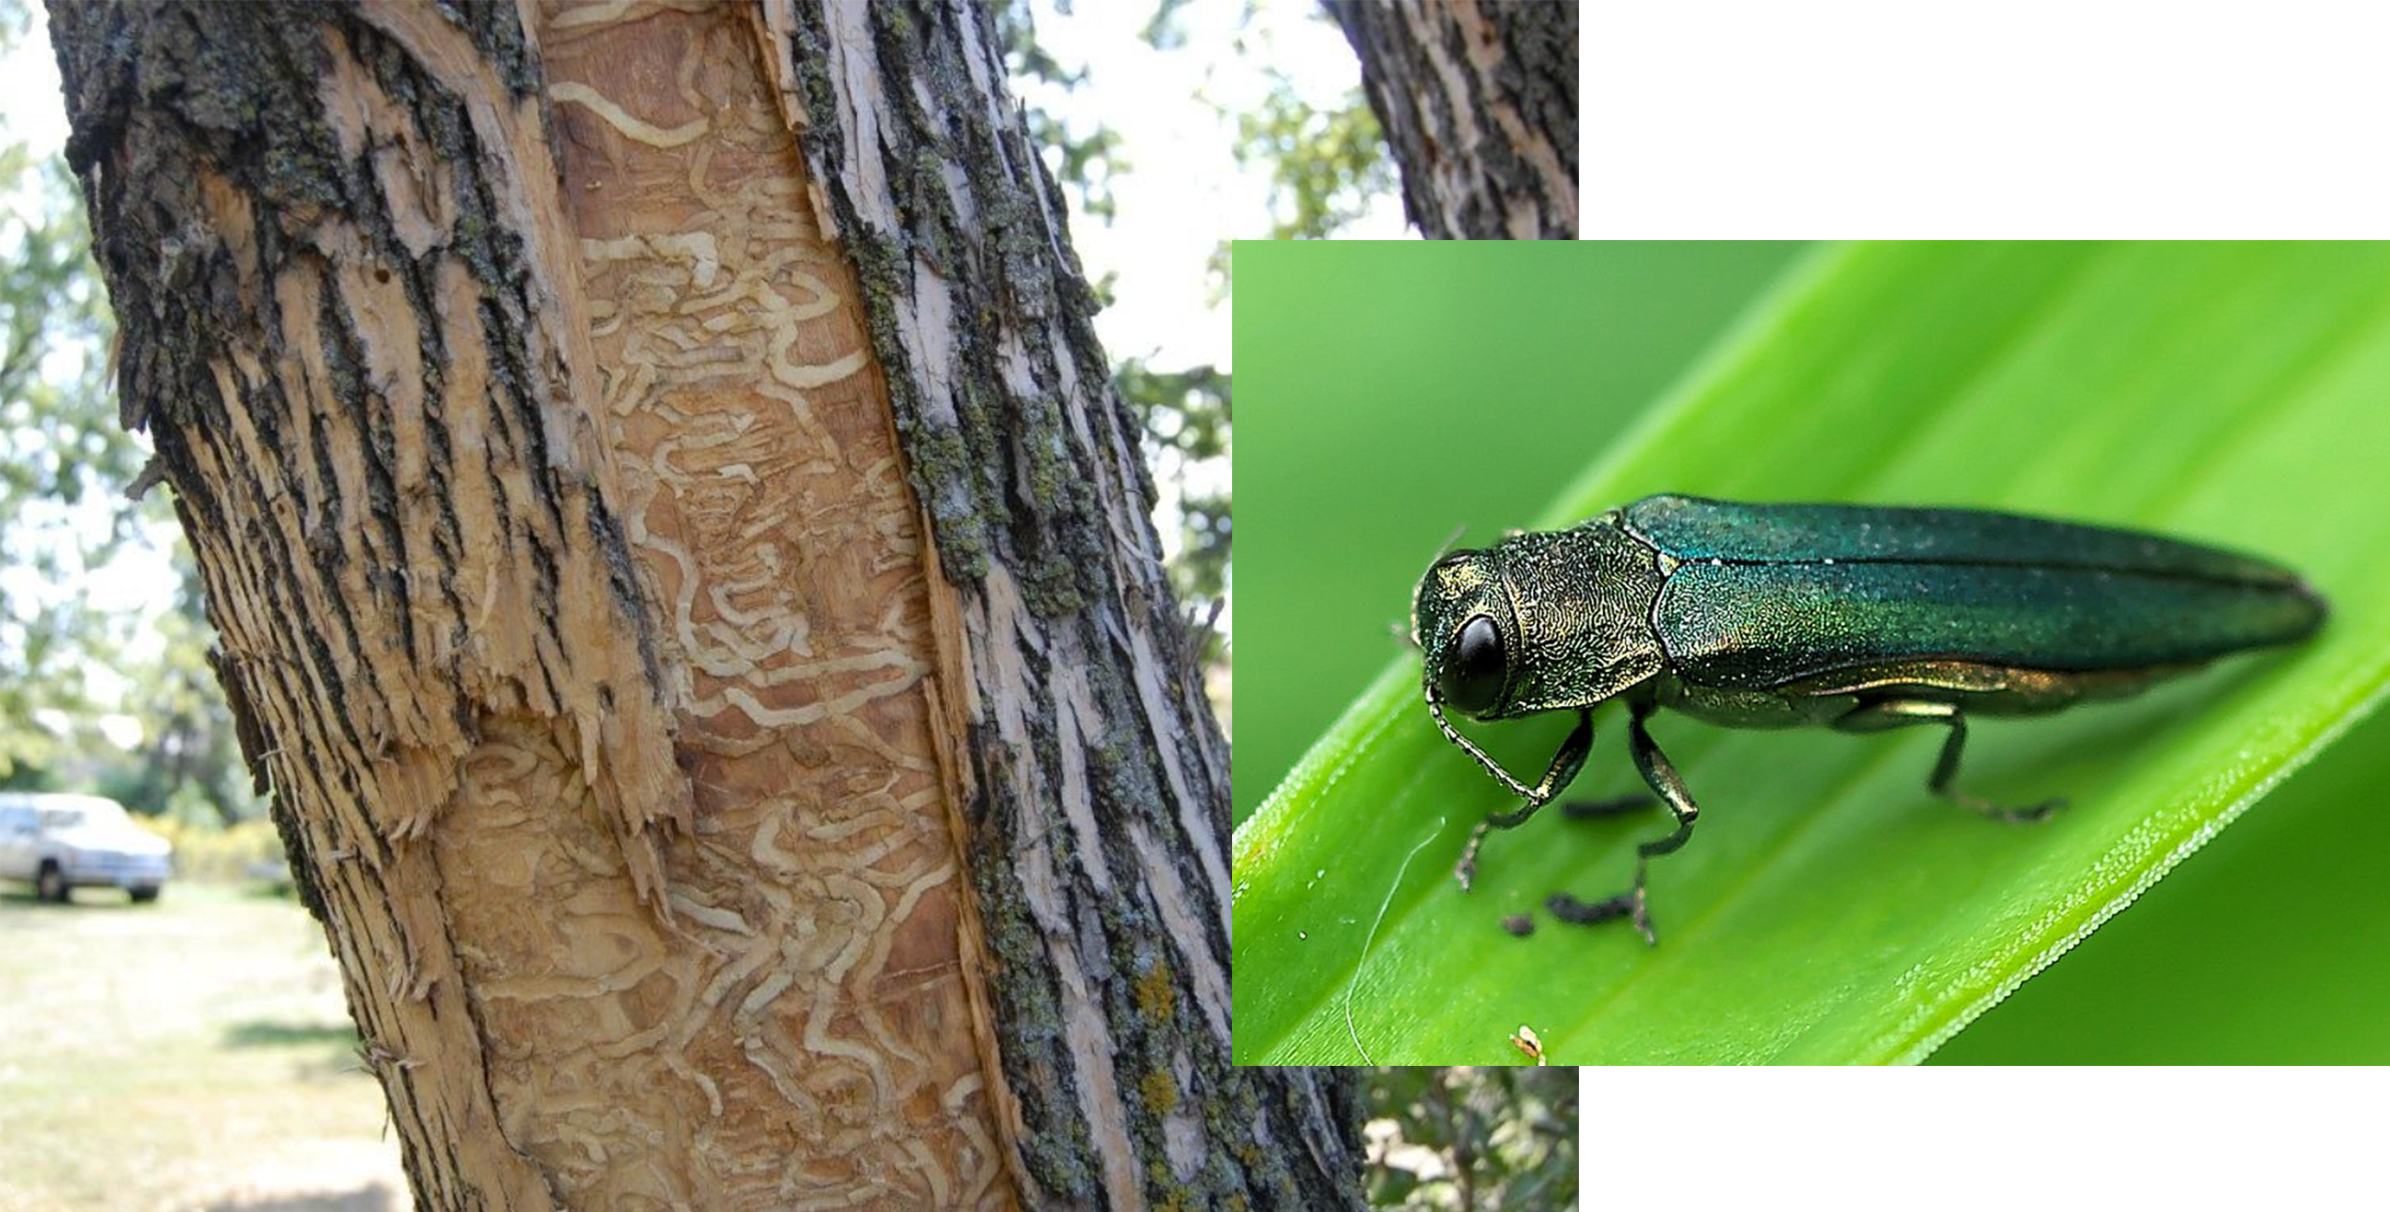 Close-up photo of the Emerald Ash Borer alongside a photo showing the distinctive curvy patterns that the bug's larvae leaves on affected ash trees before they reach adulthood and emerge from the tree.